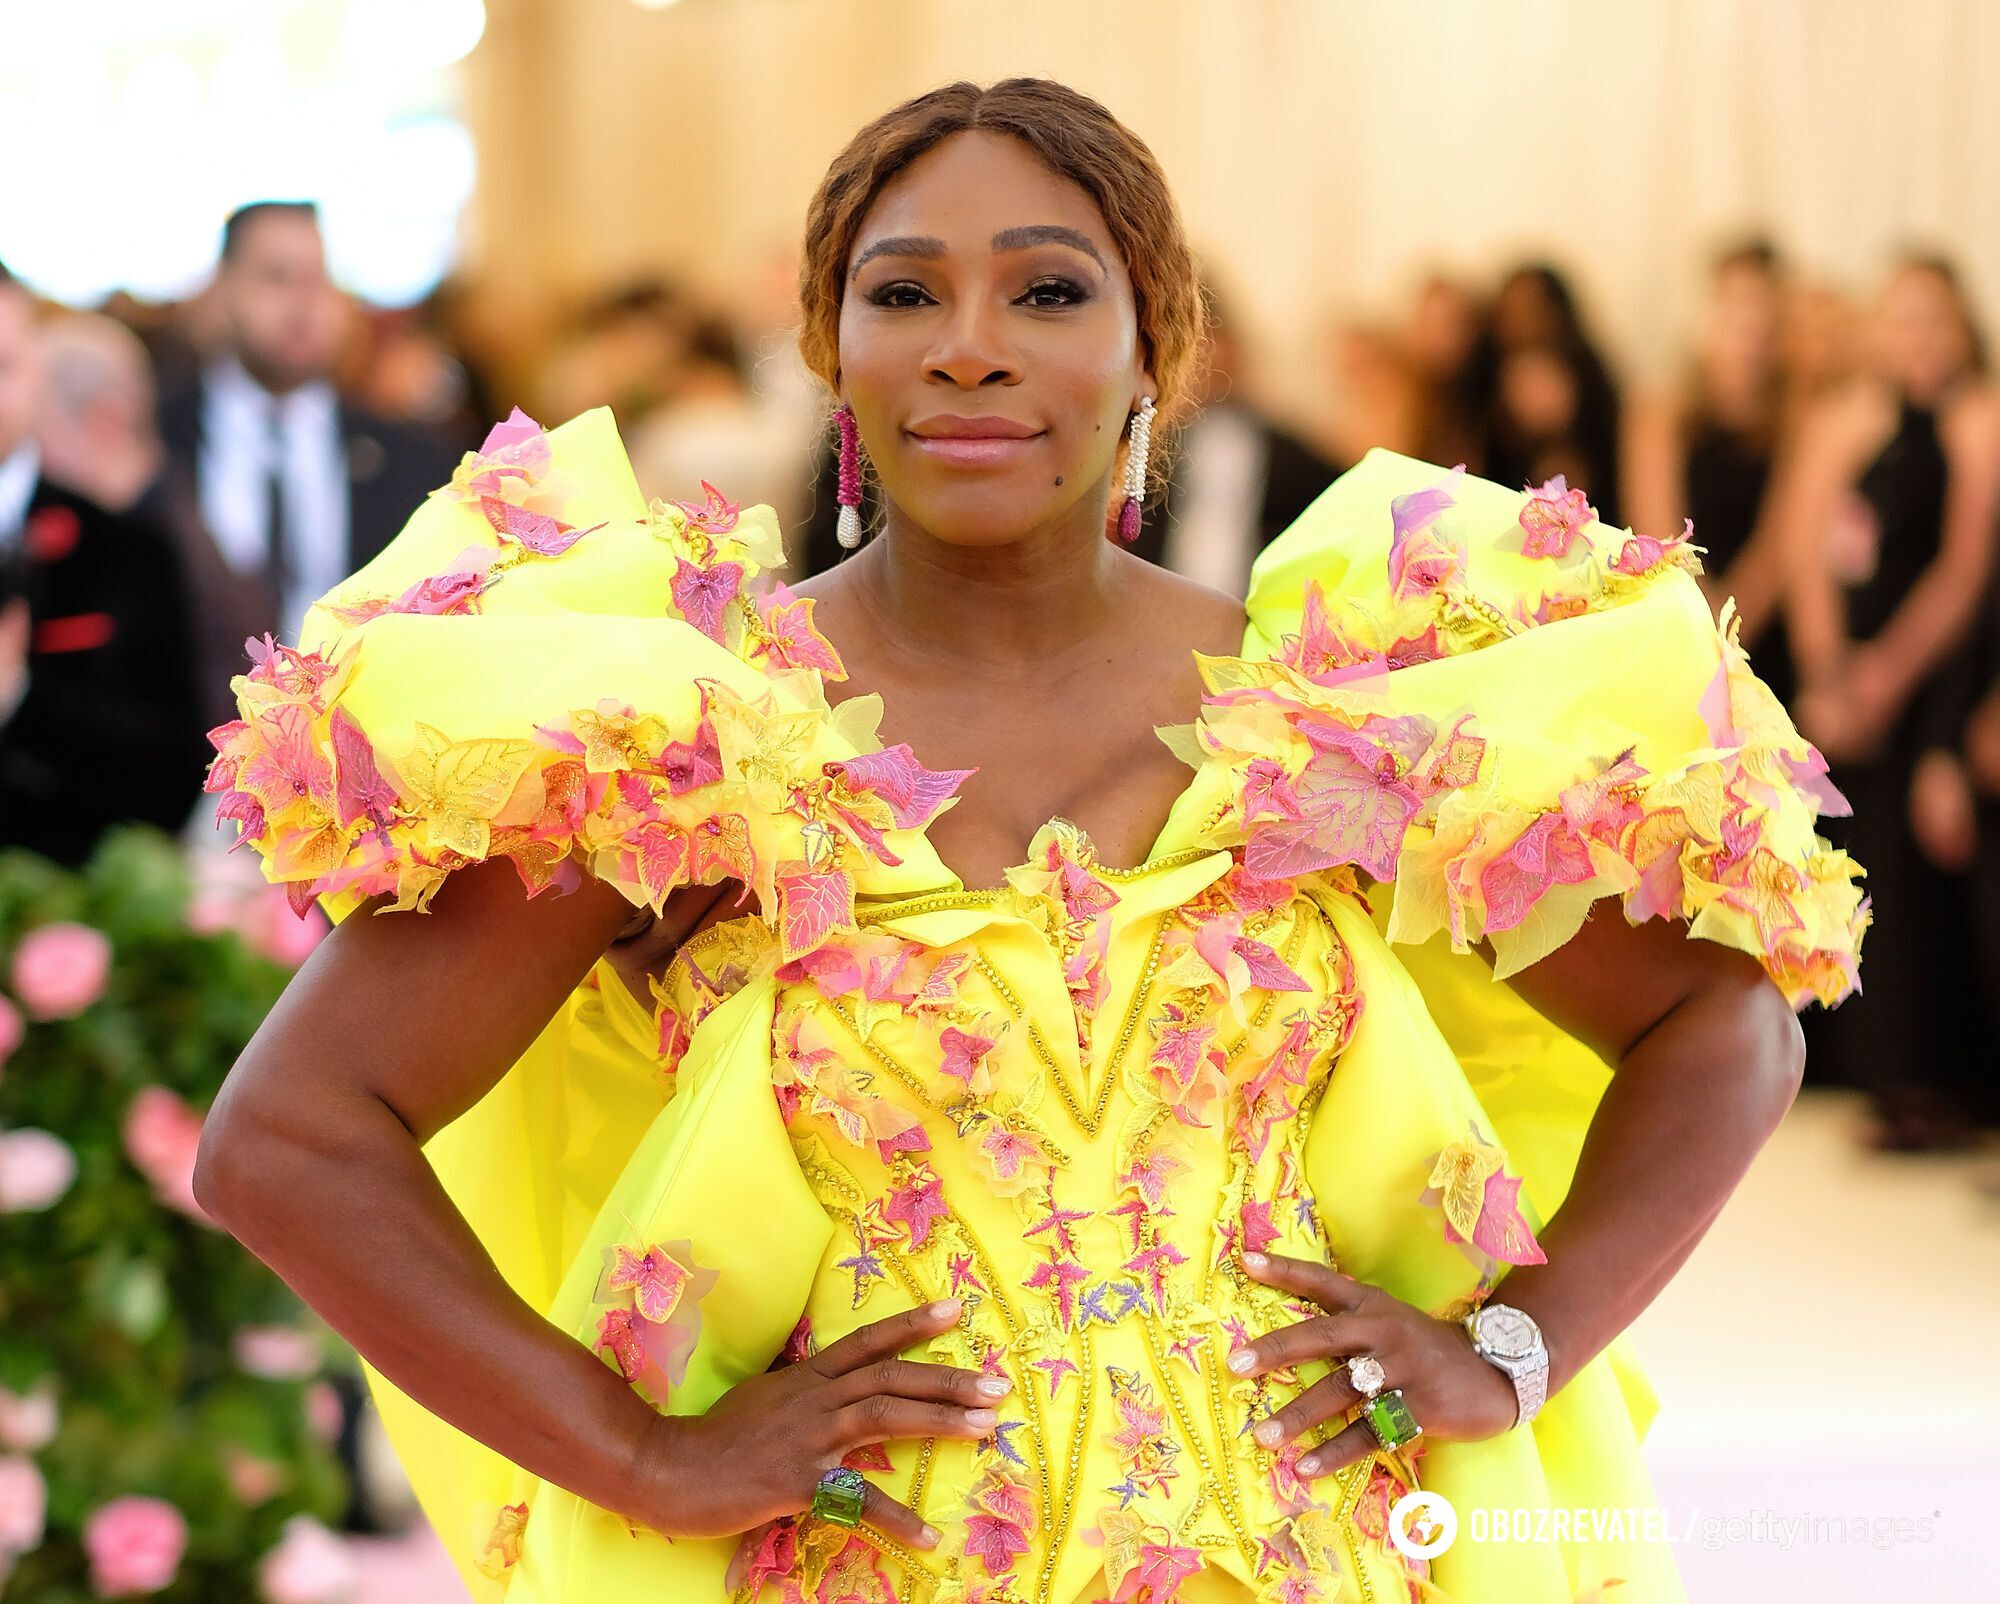 These 8 photos show why Serena Williams has cemented herself in the ranking of worst-dressed celebrities